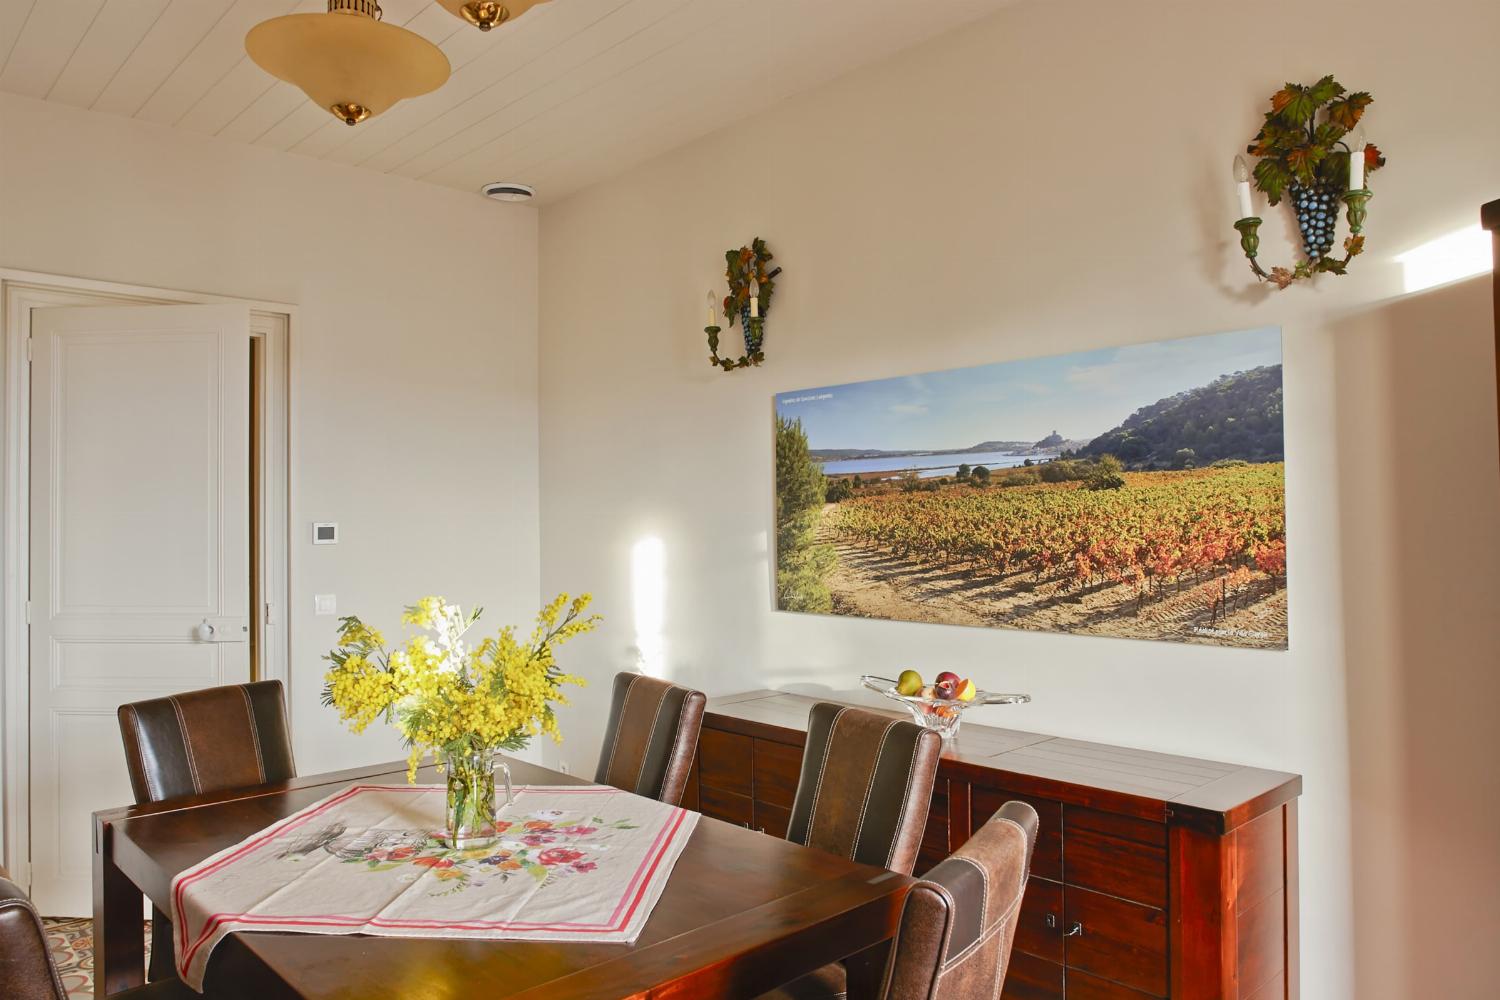 Dining room | Holiday home in the South of France